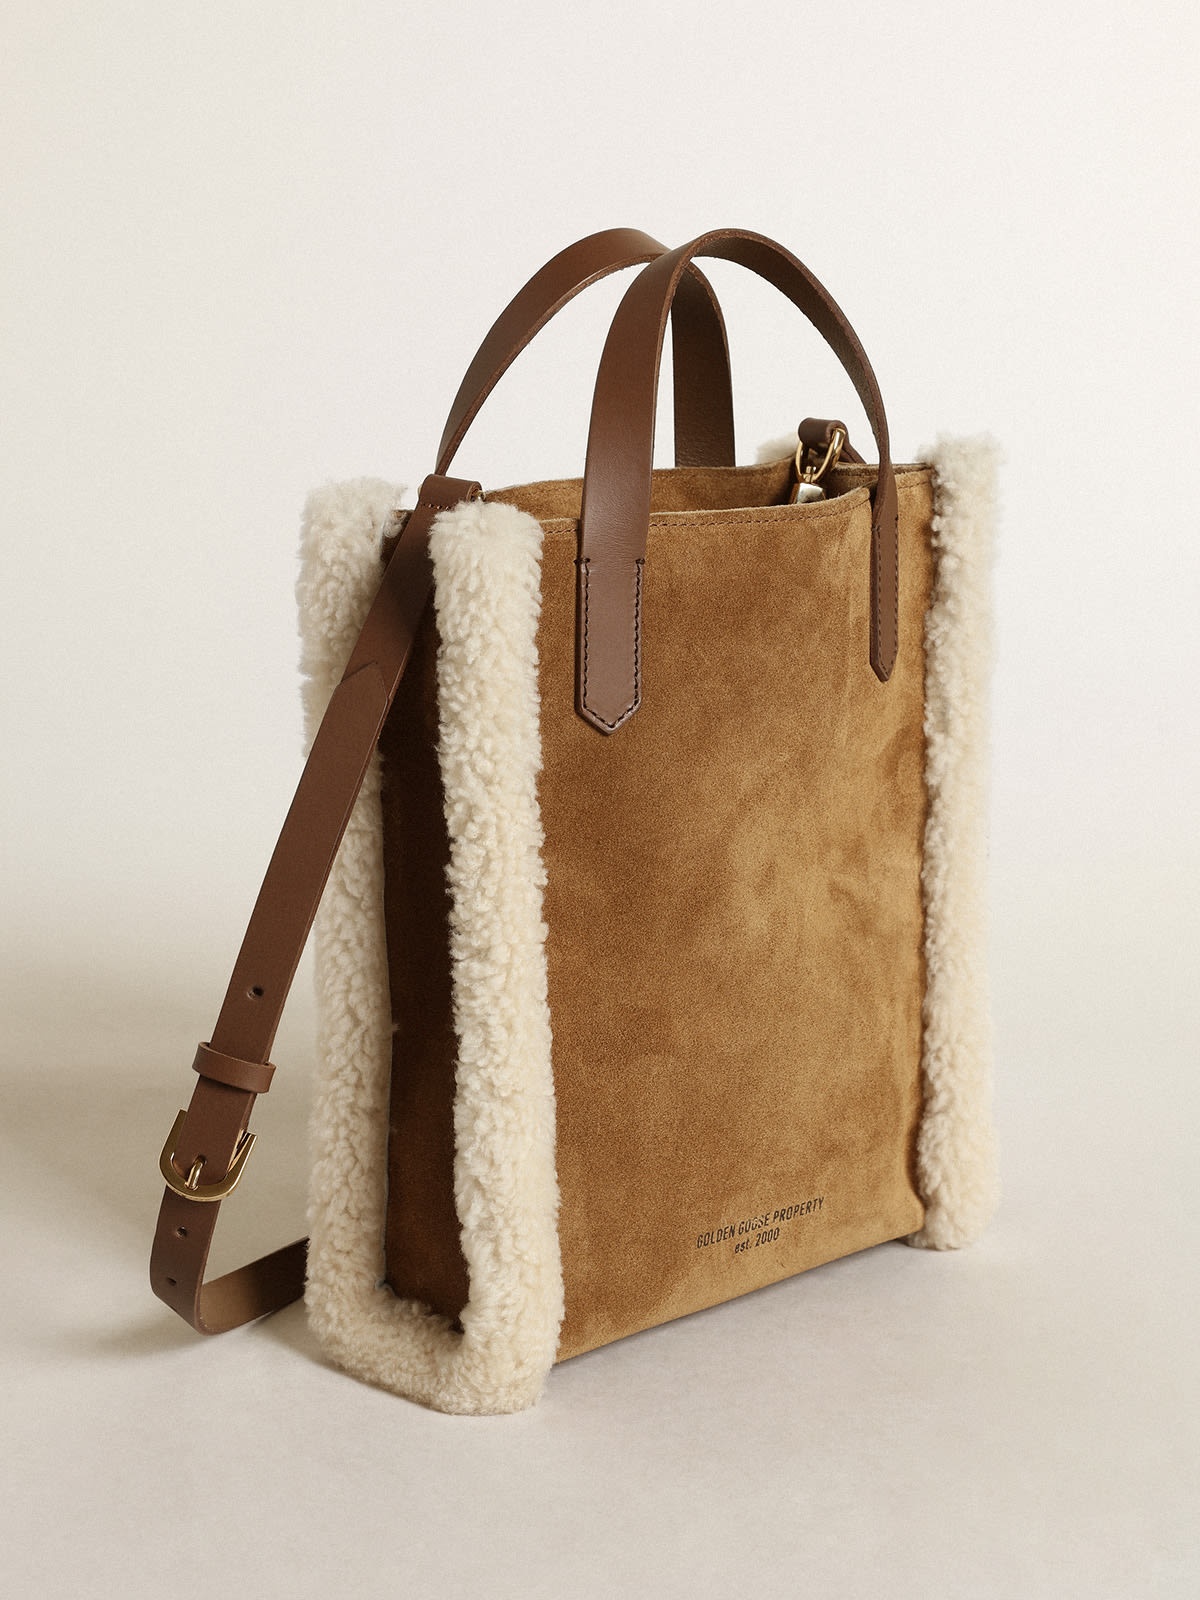 Mini California Bag in suede leather with shearling trim - 2